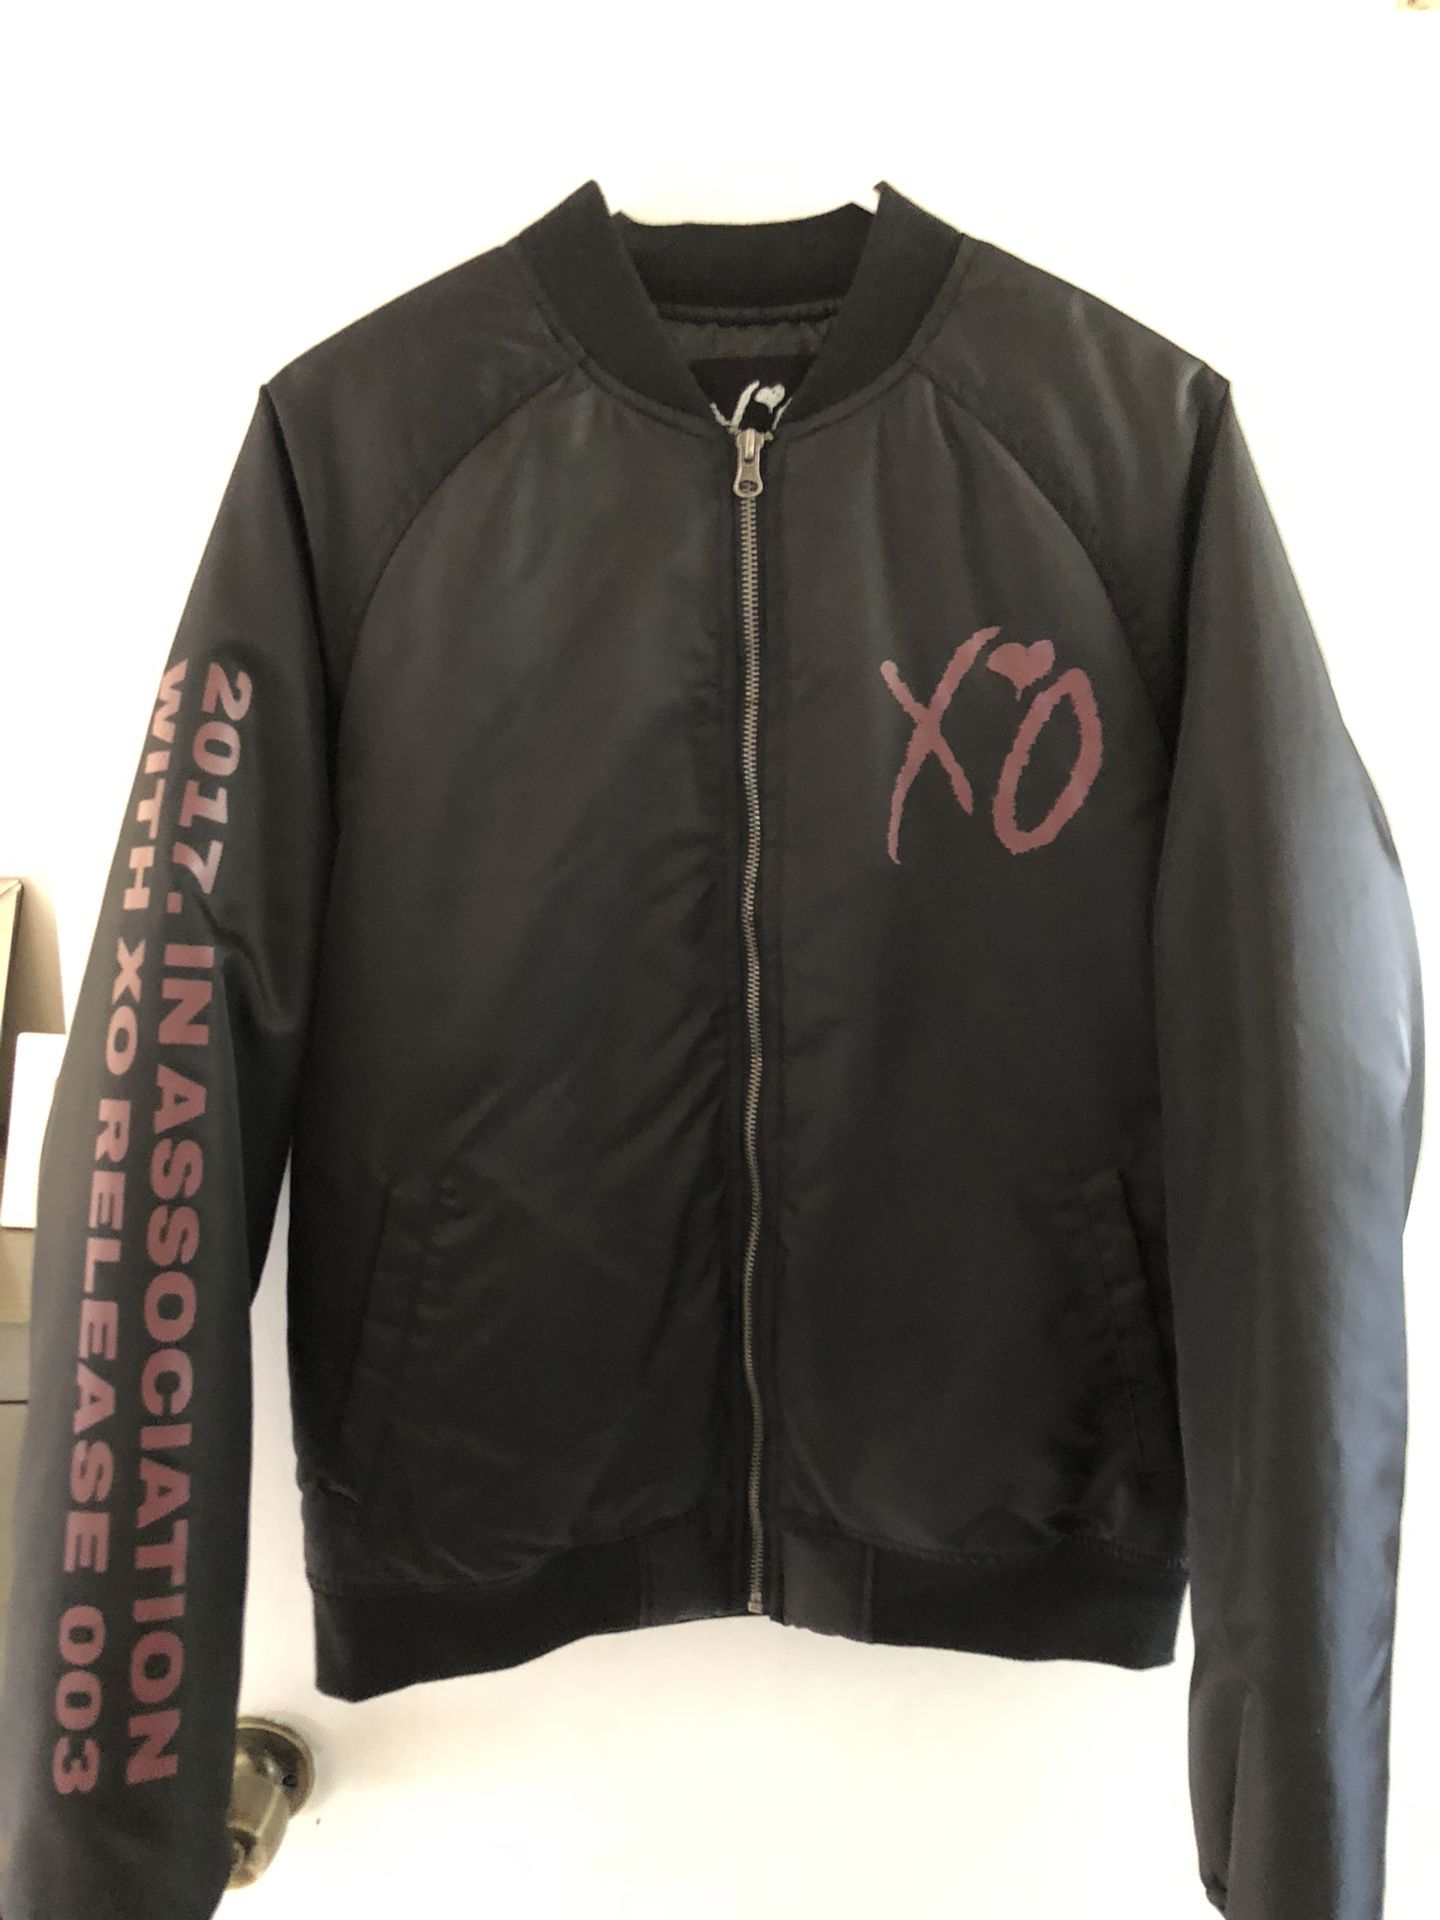 2017 Weeknd XO Bomber jacket - Asia collection